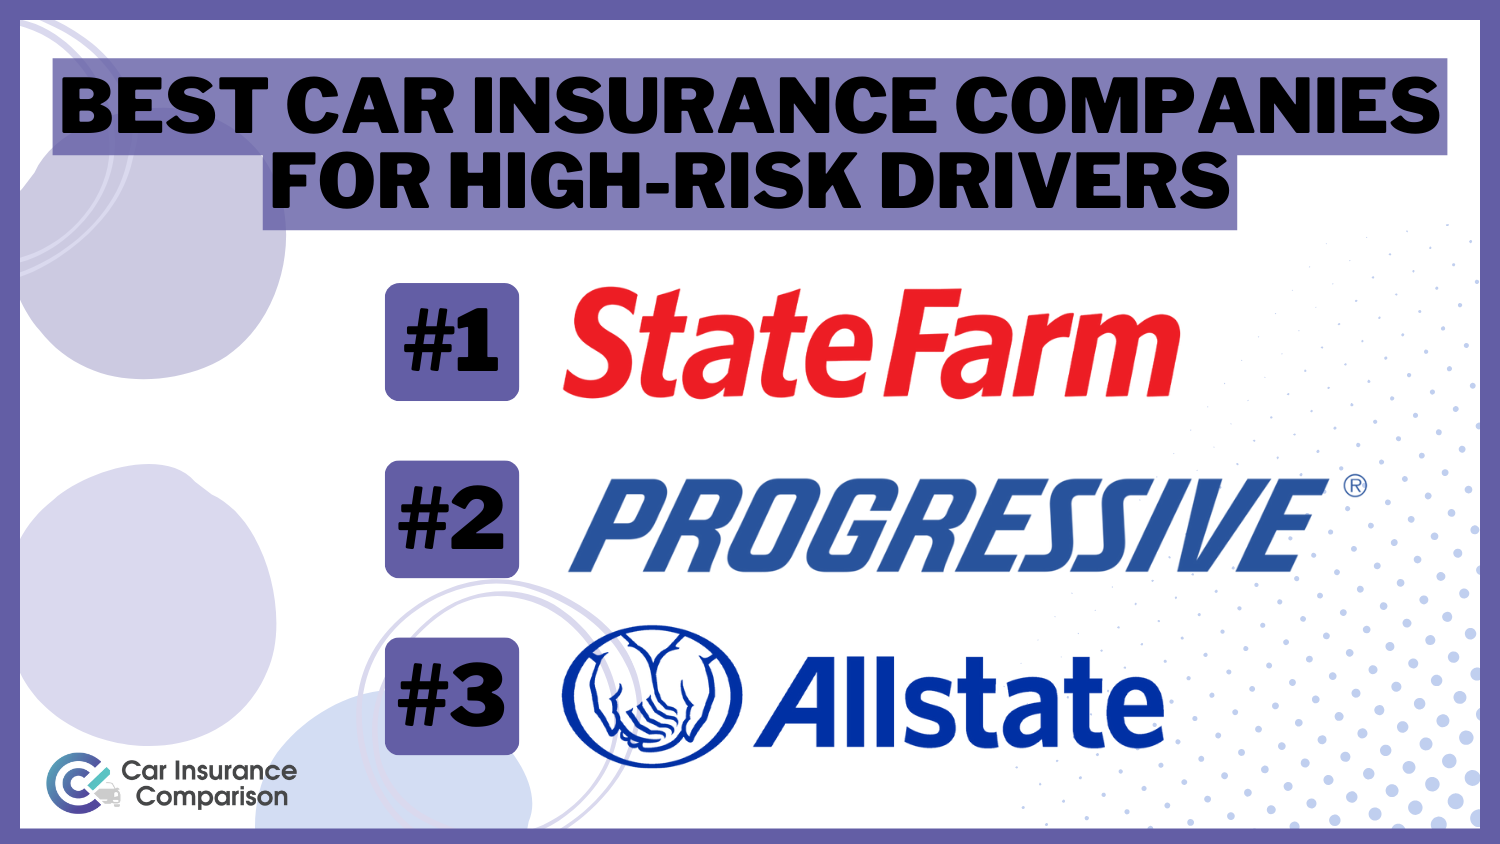 Best Car Insurance Companies For High-Risk Drivers: State Farm, Progressive, and Allstate